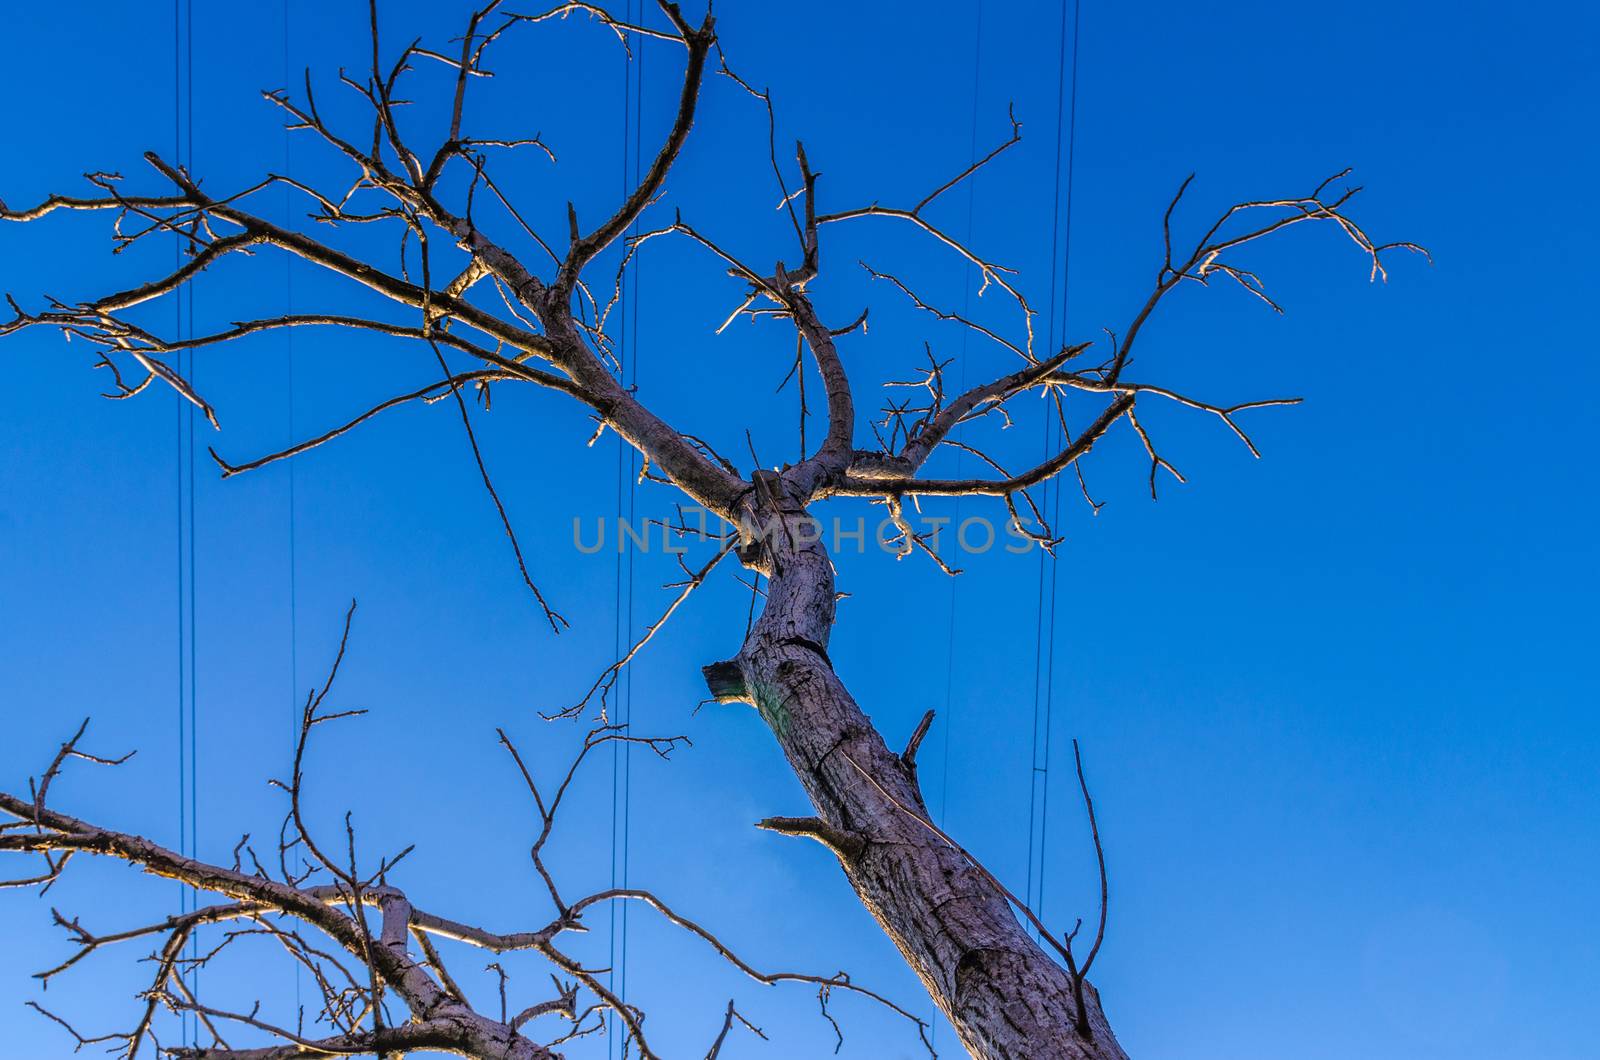 dry tree on background of blue sky with high-voltage wires